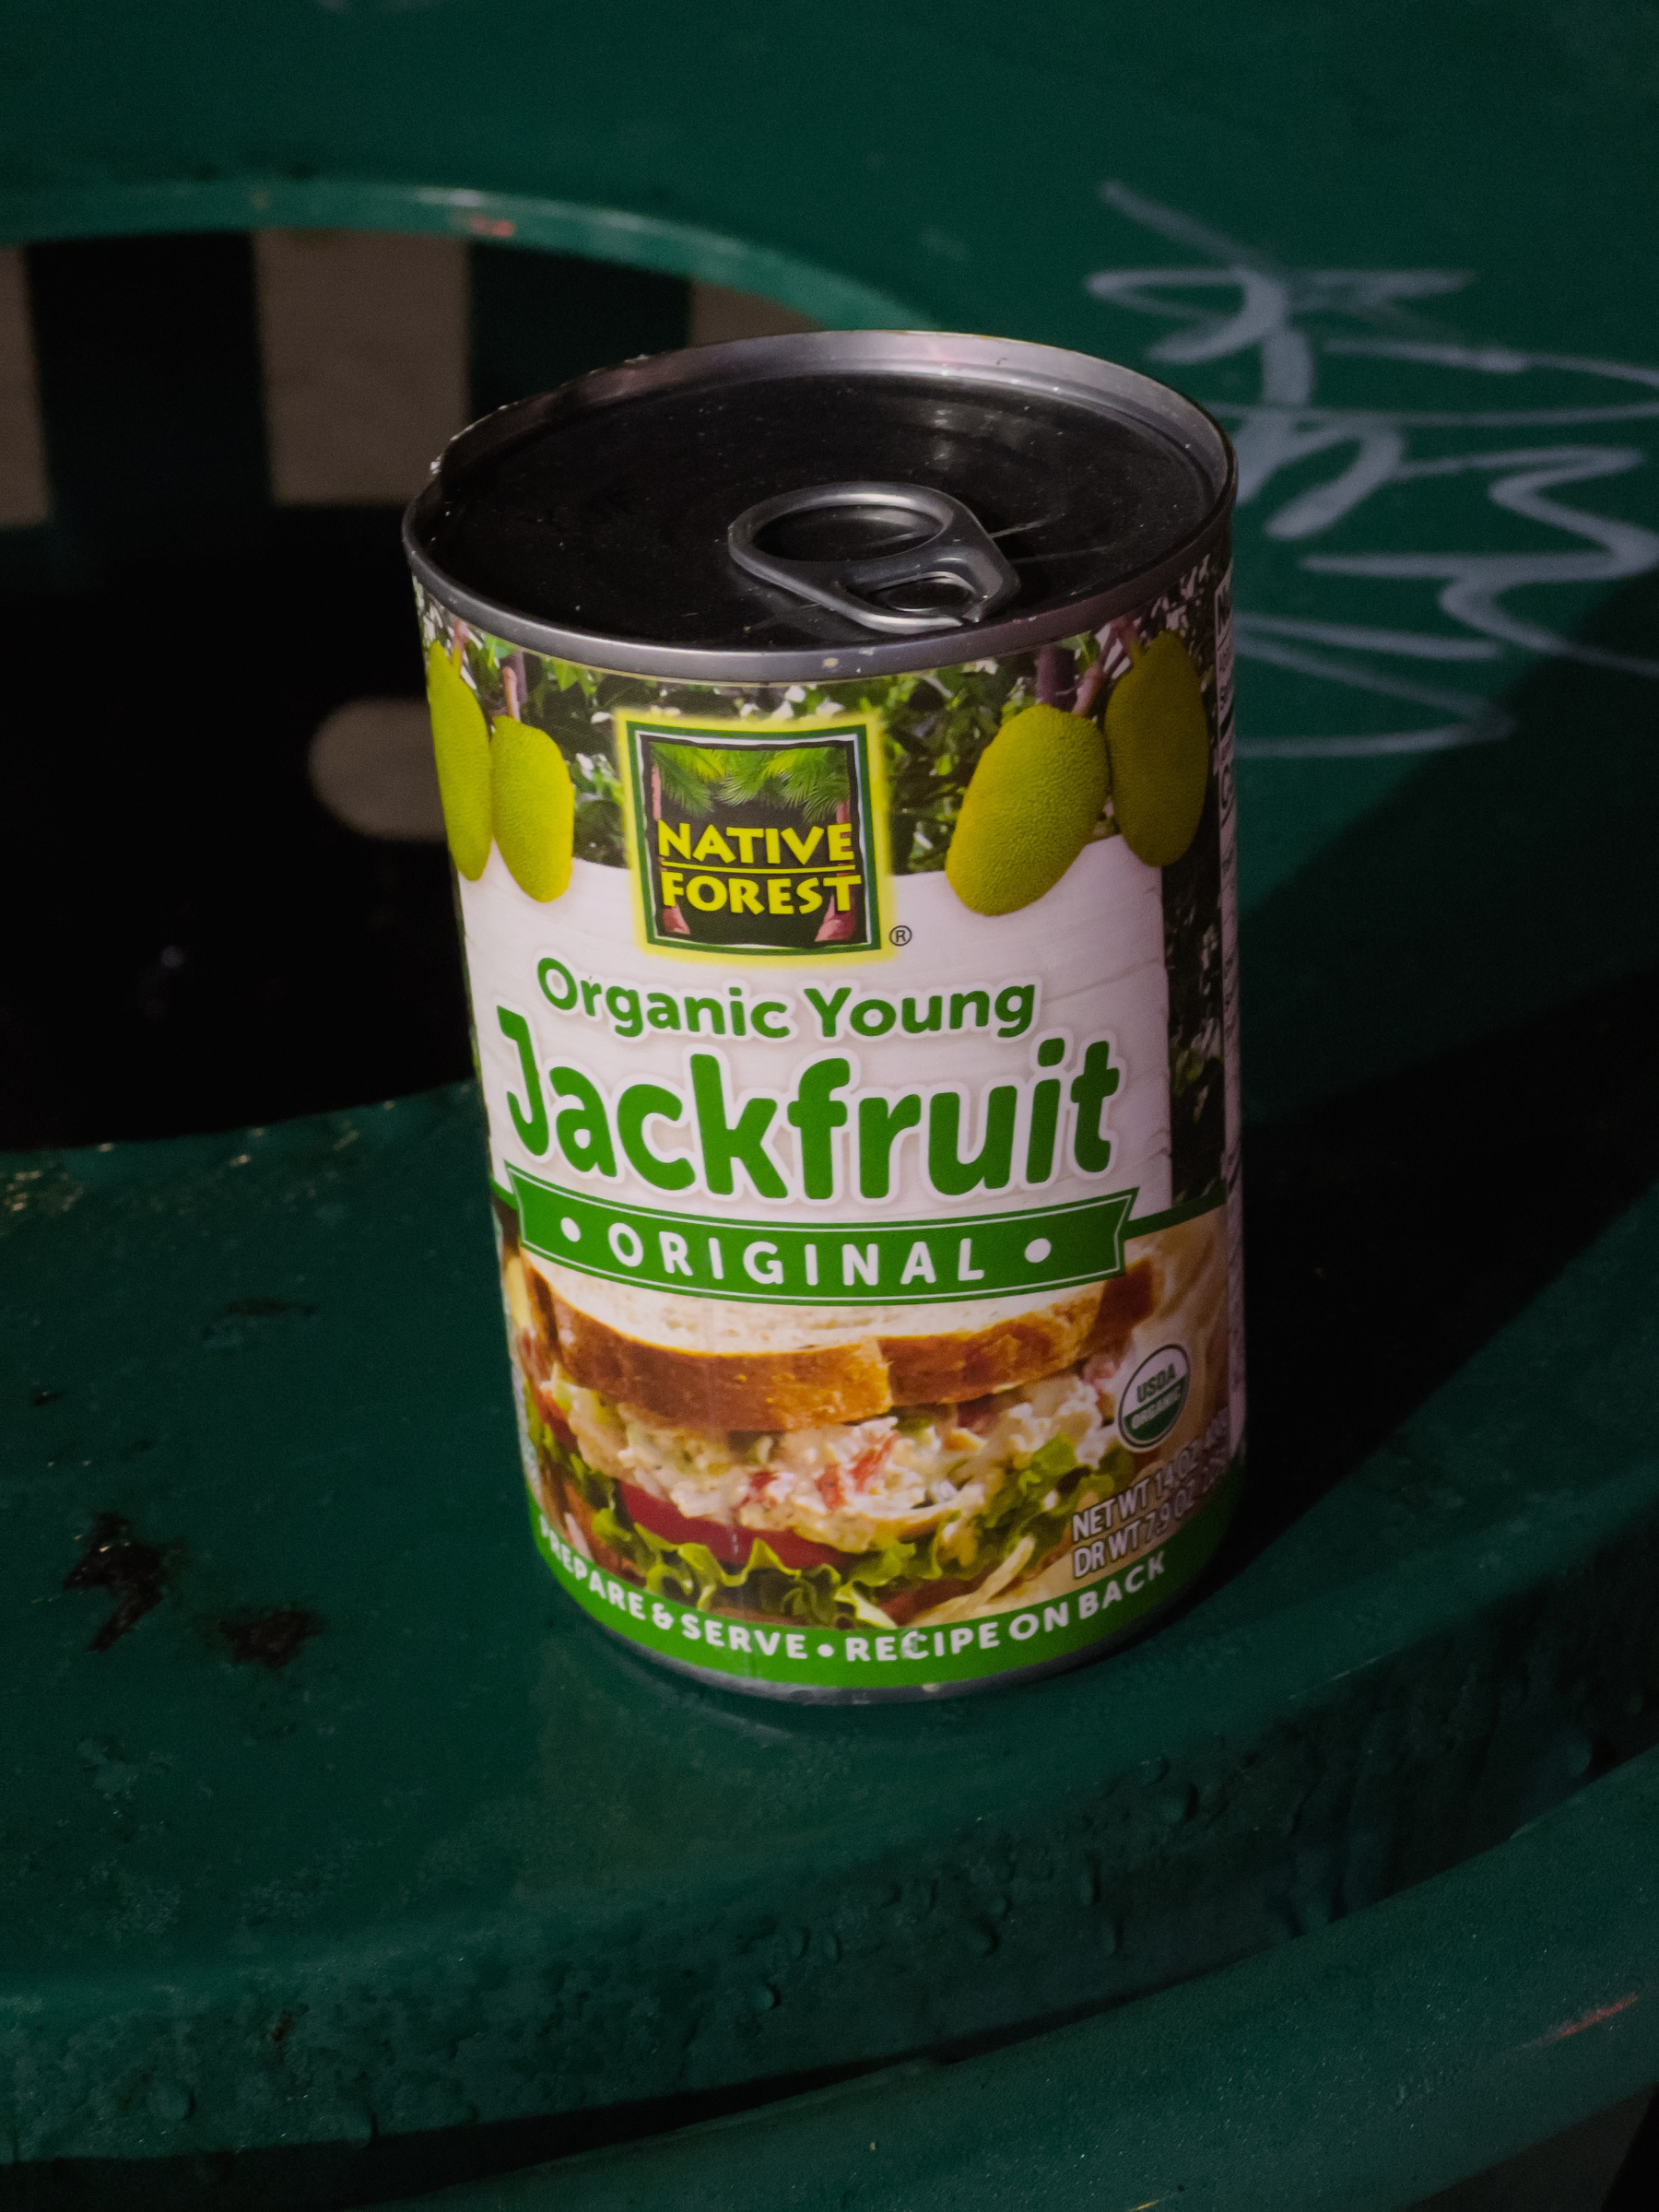 Unopened can of organic jackfruit sitting on a trash receptacle.